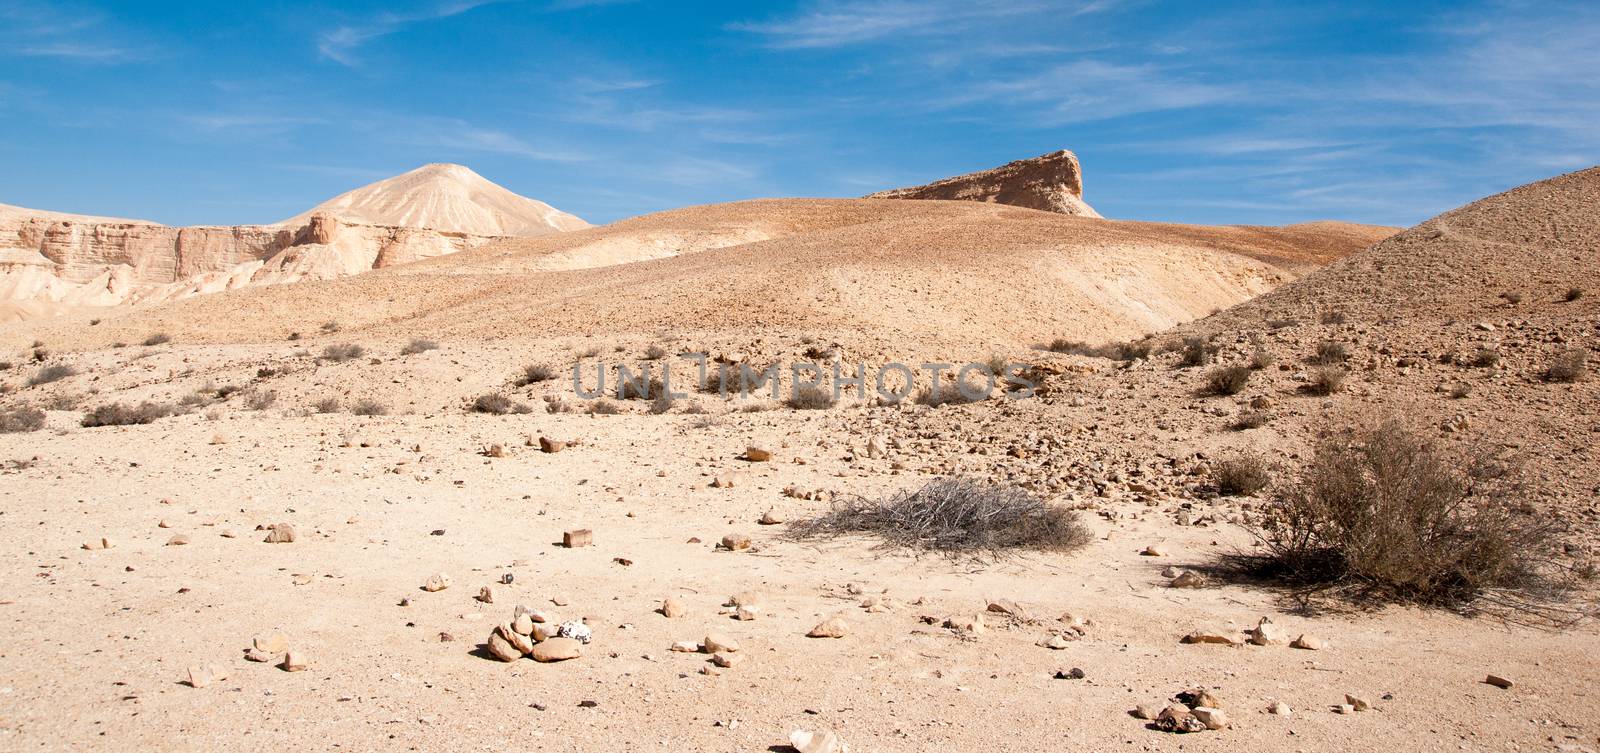 Stone desert tourism hiking in mountains under blue sky